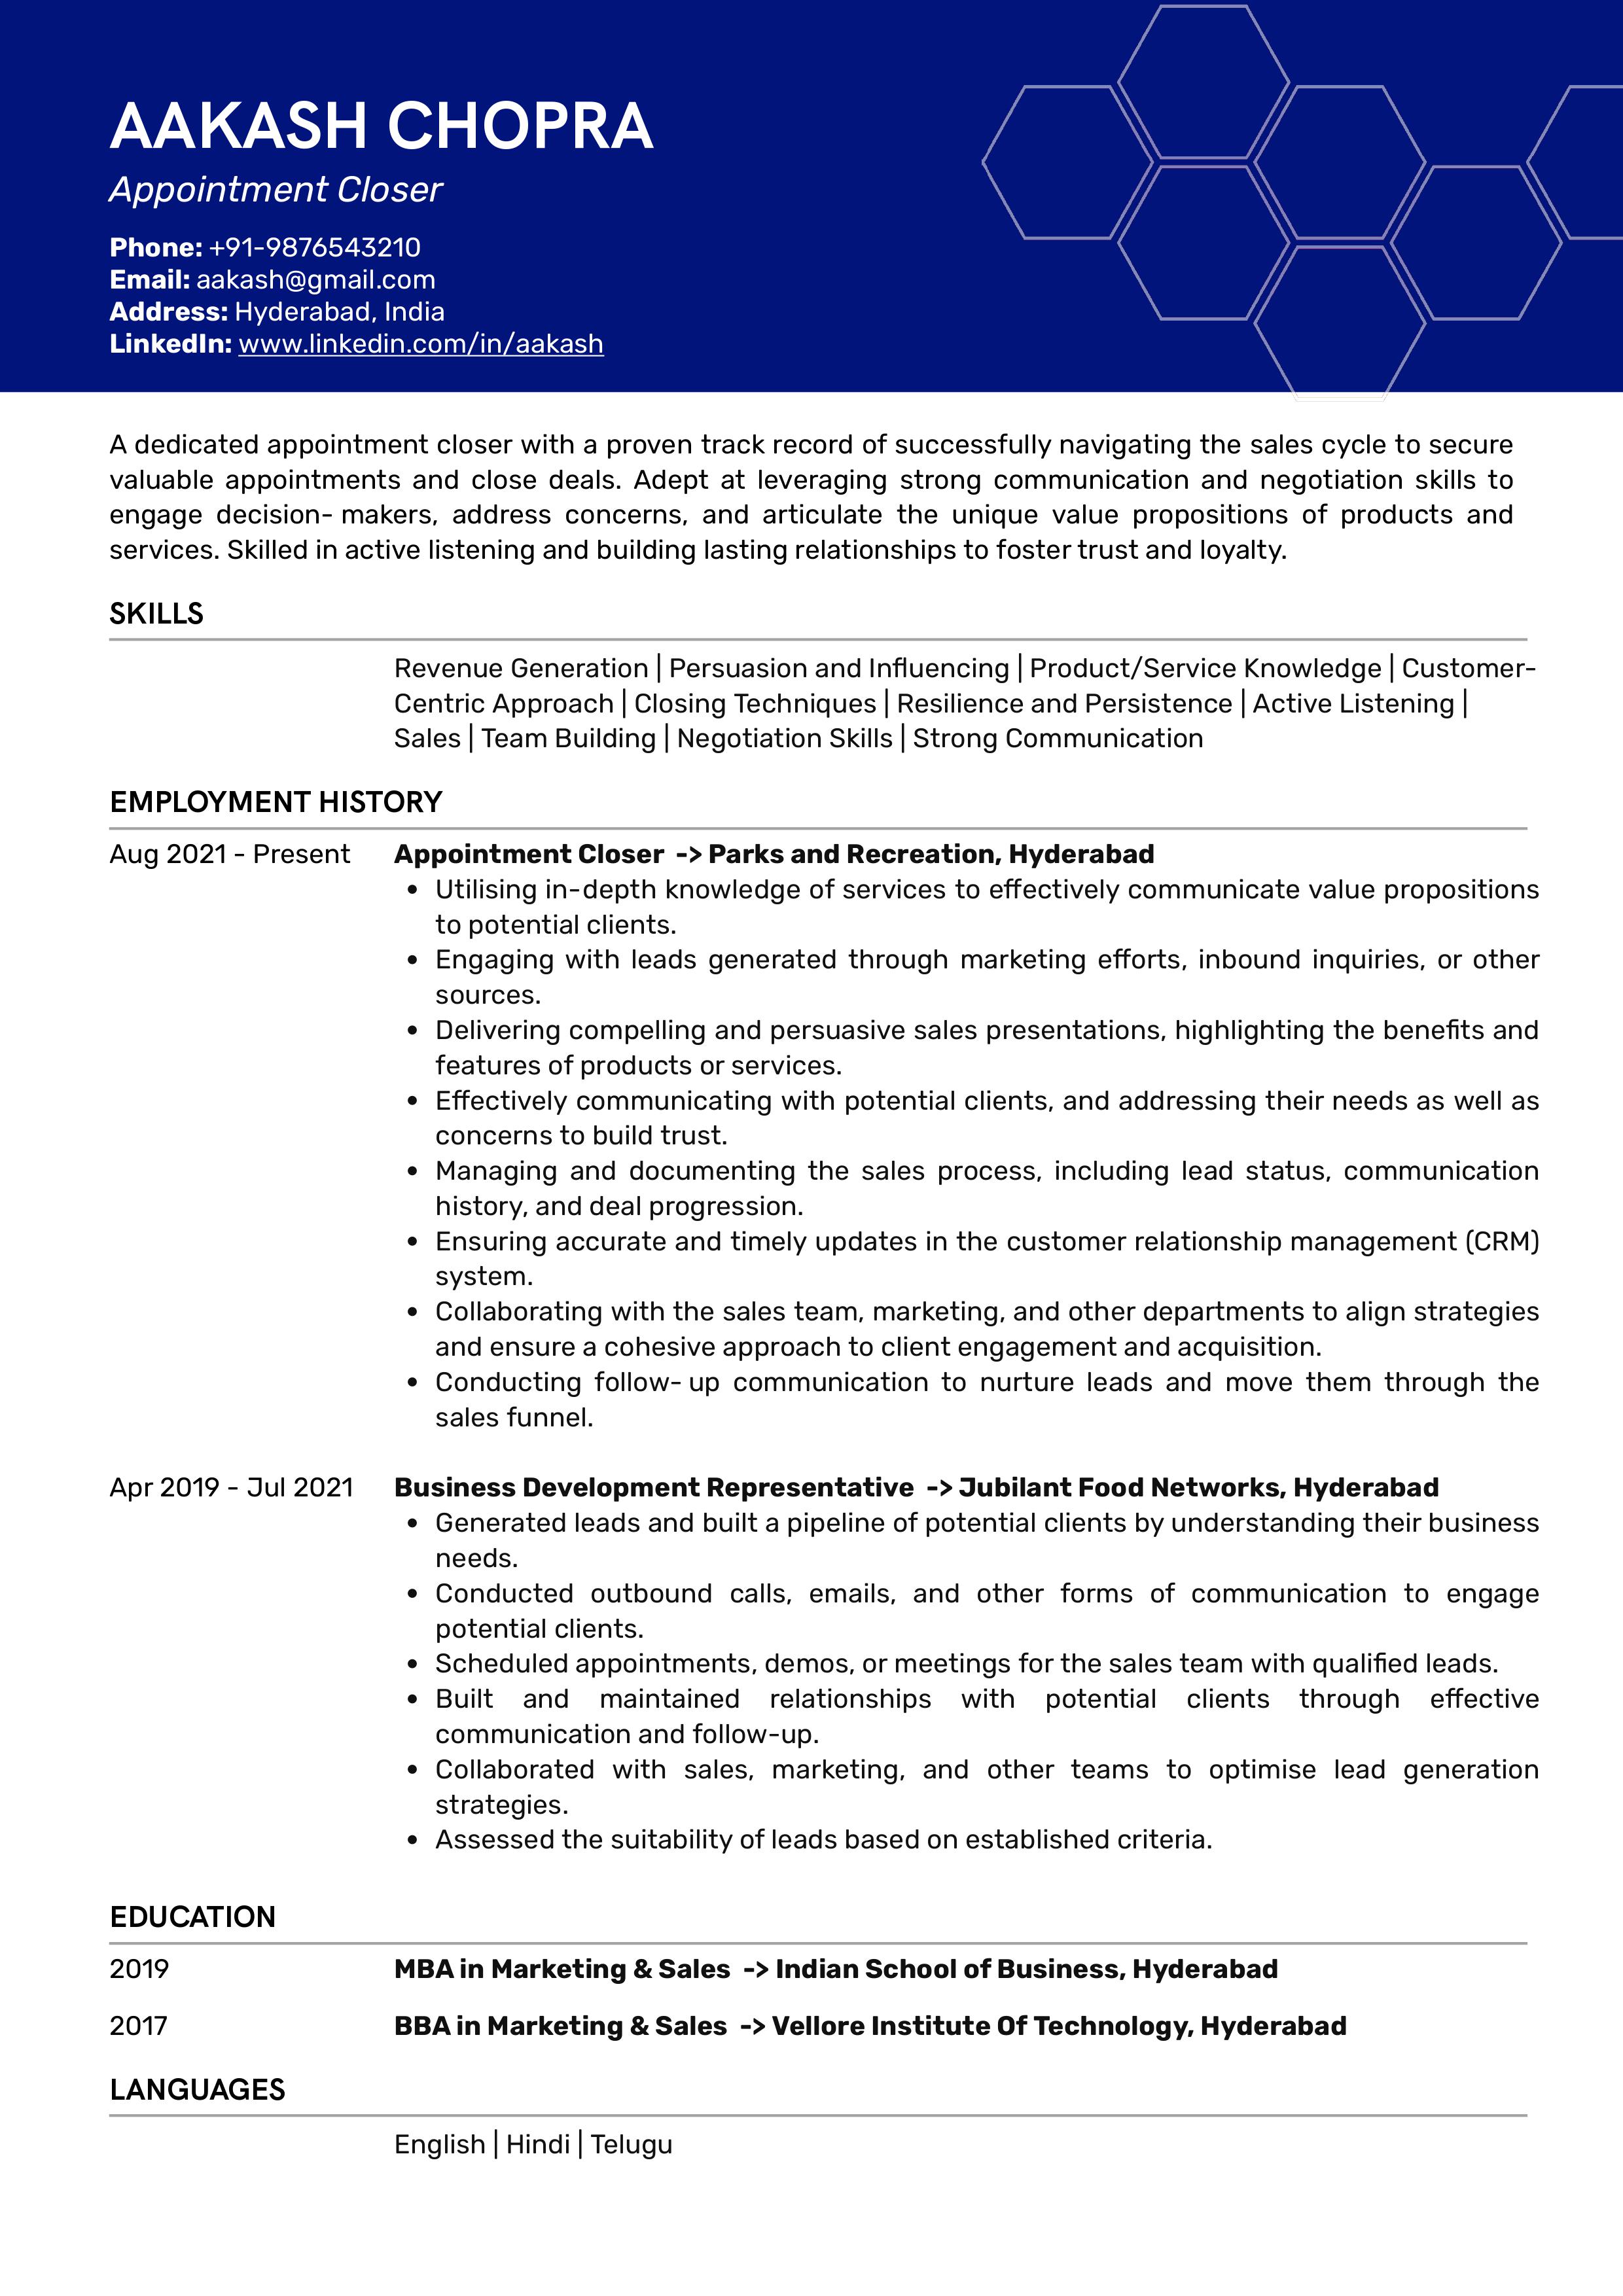 Sample Resume of Appointment Closer | Free Resume Templates & Samples on Resumod.co